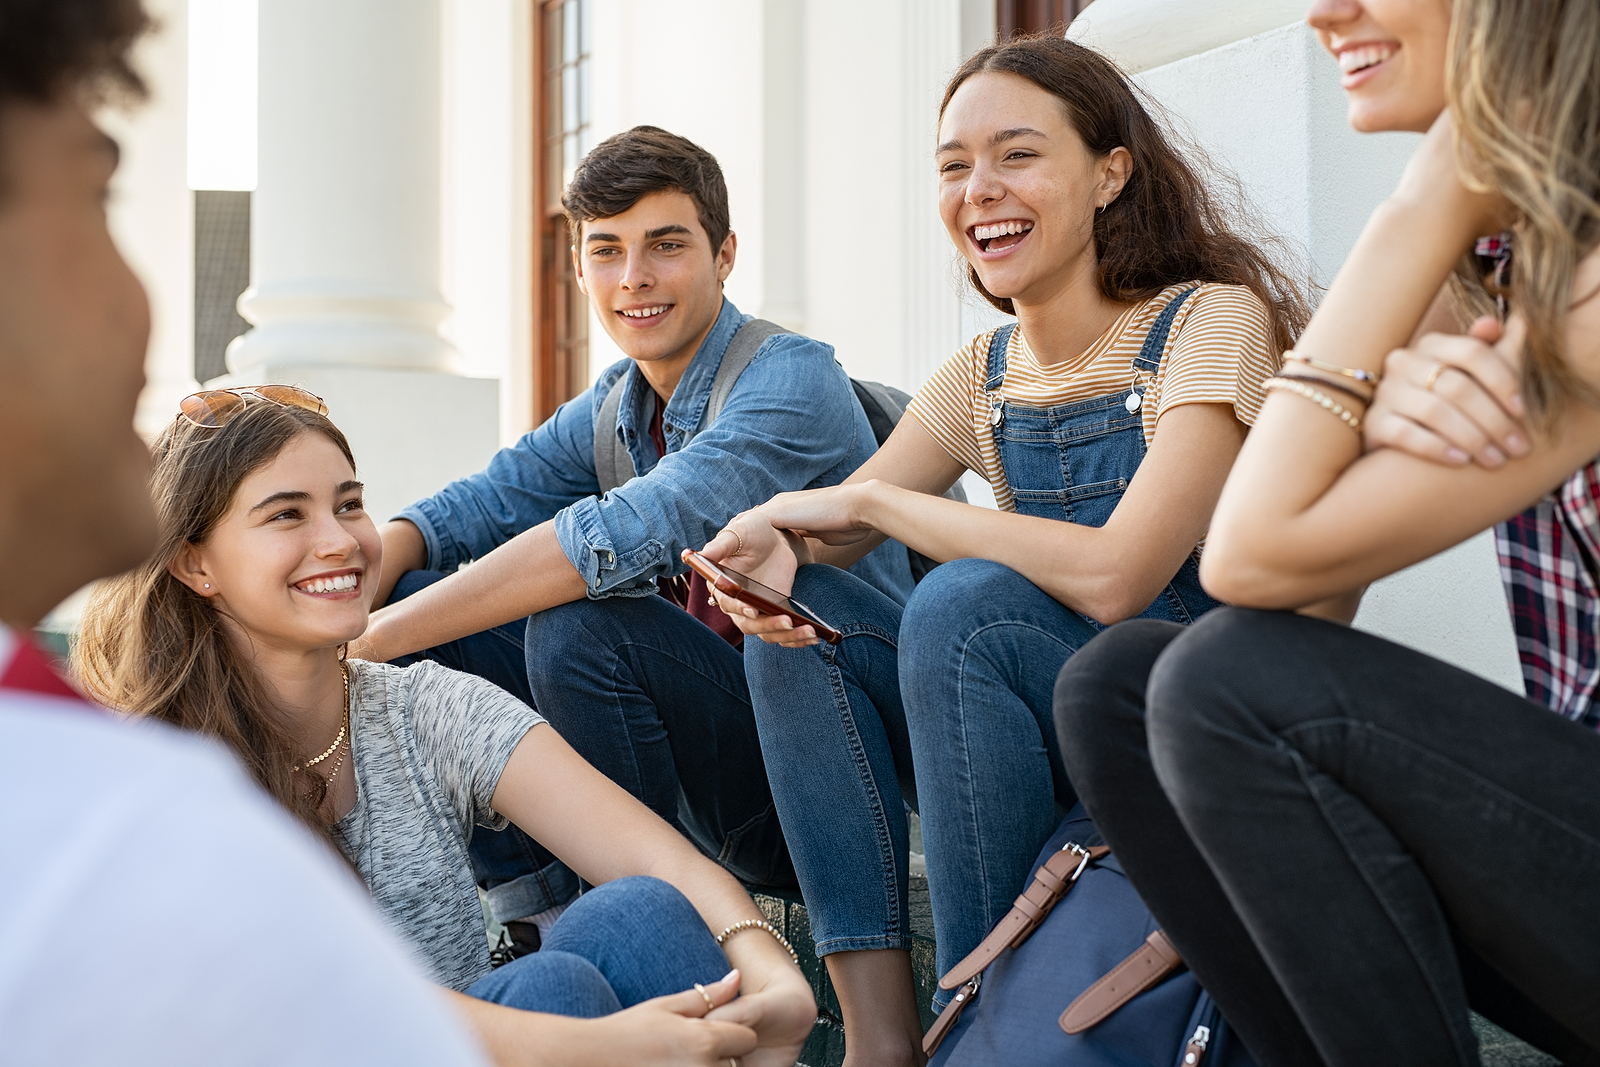 A group of young adults talk in a group focusing on one girl in particular, smiling and laughing together.